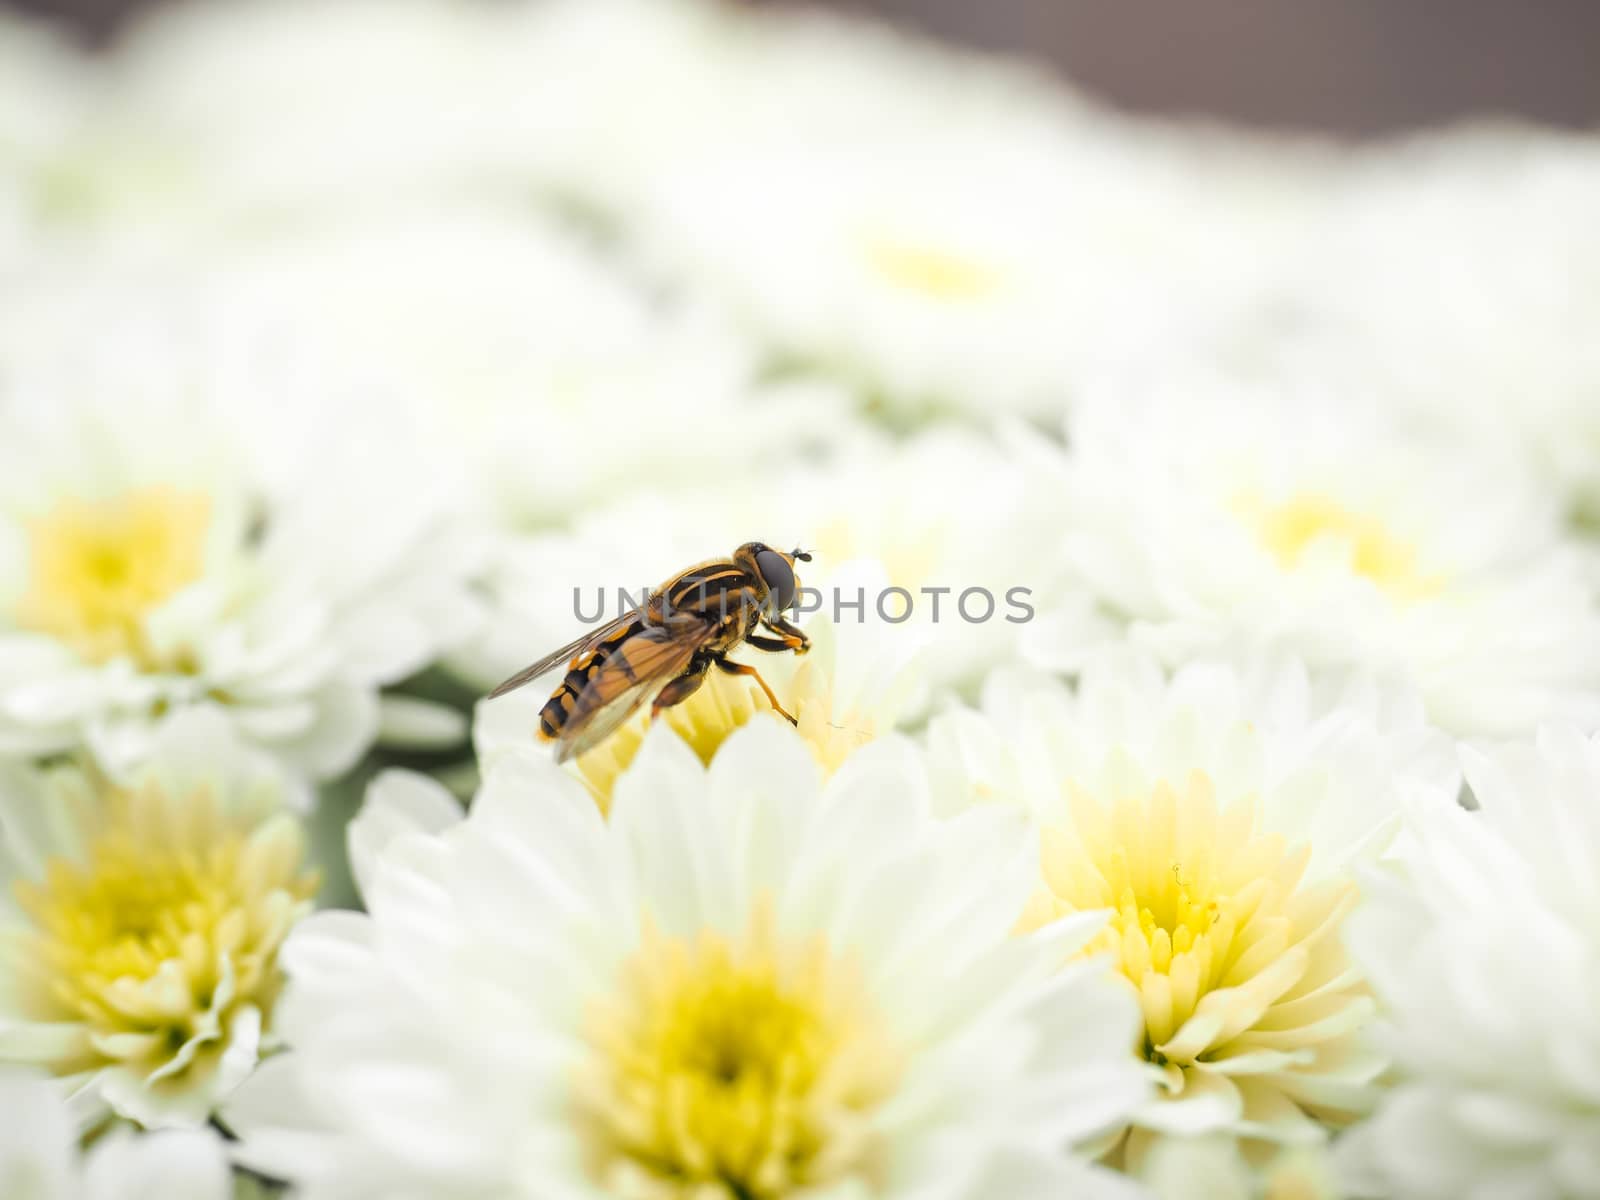 Bee gathering nectar while pollinating a pile of white flowers with yellow center